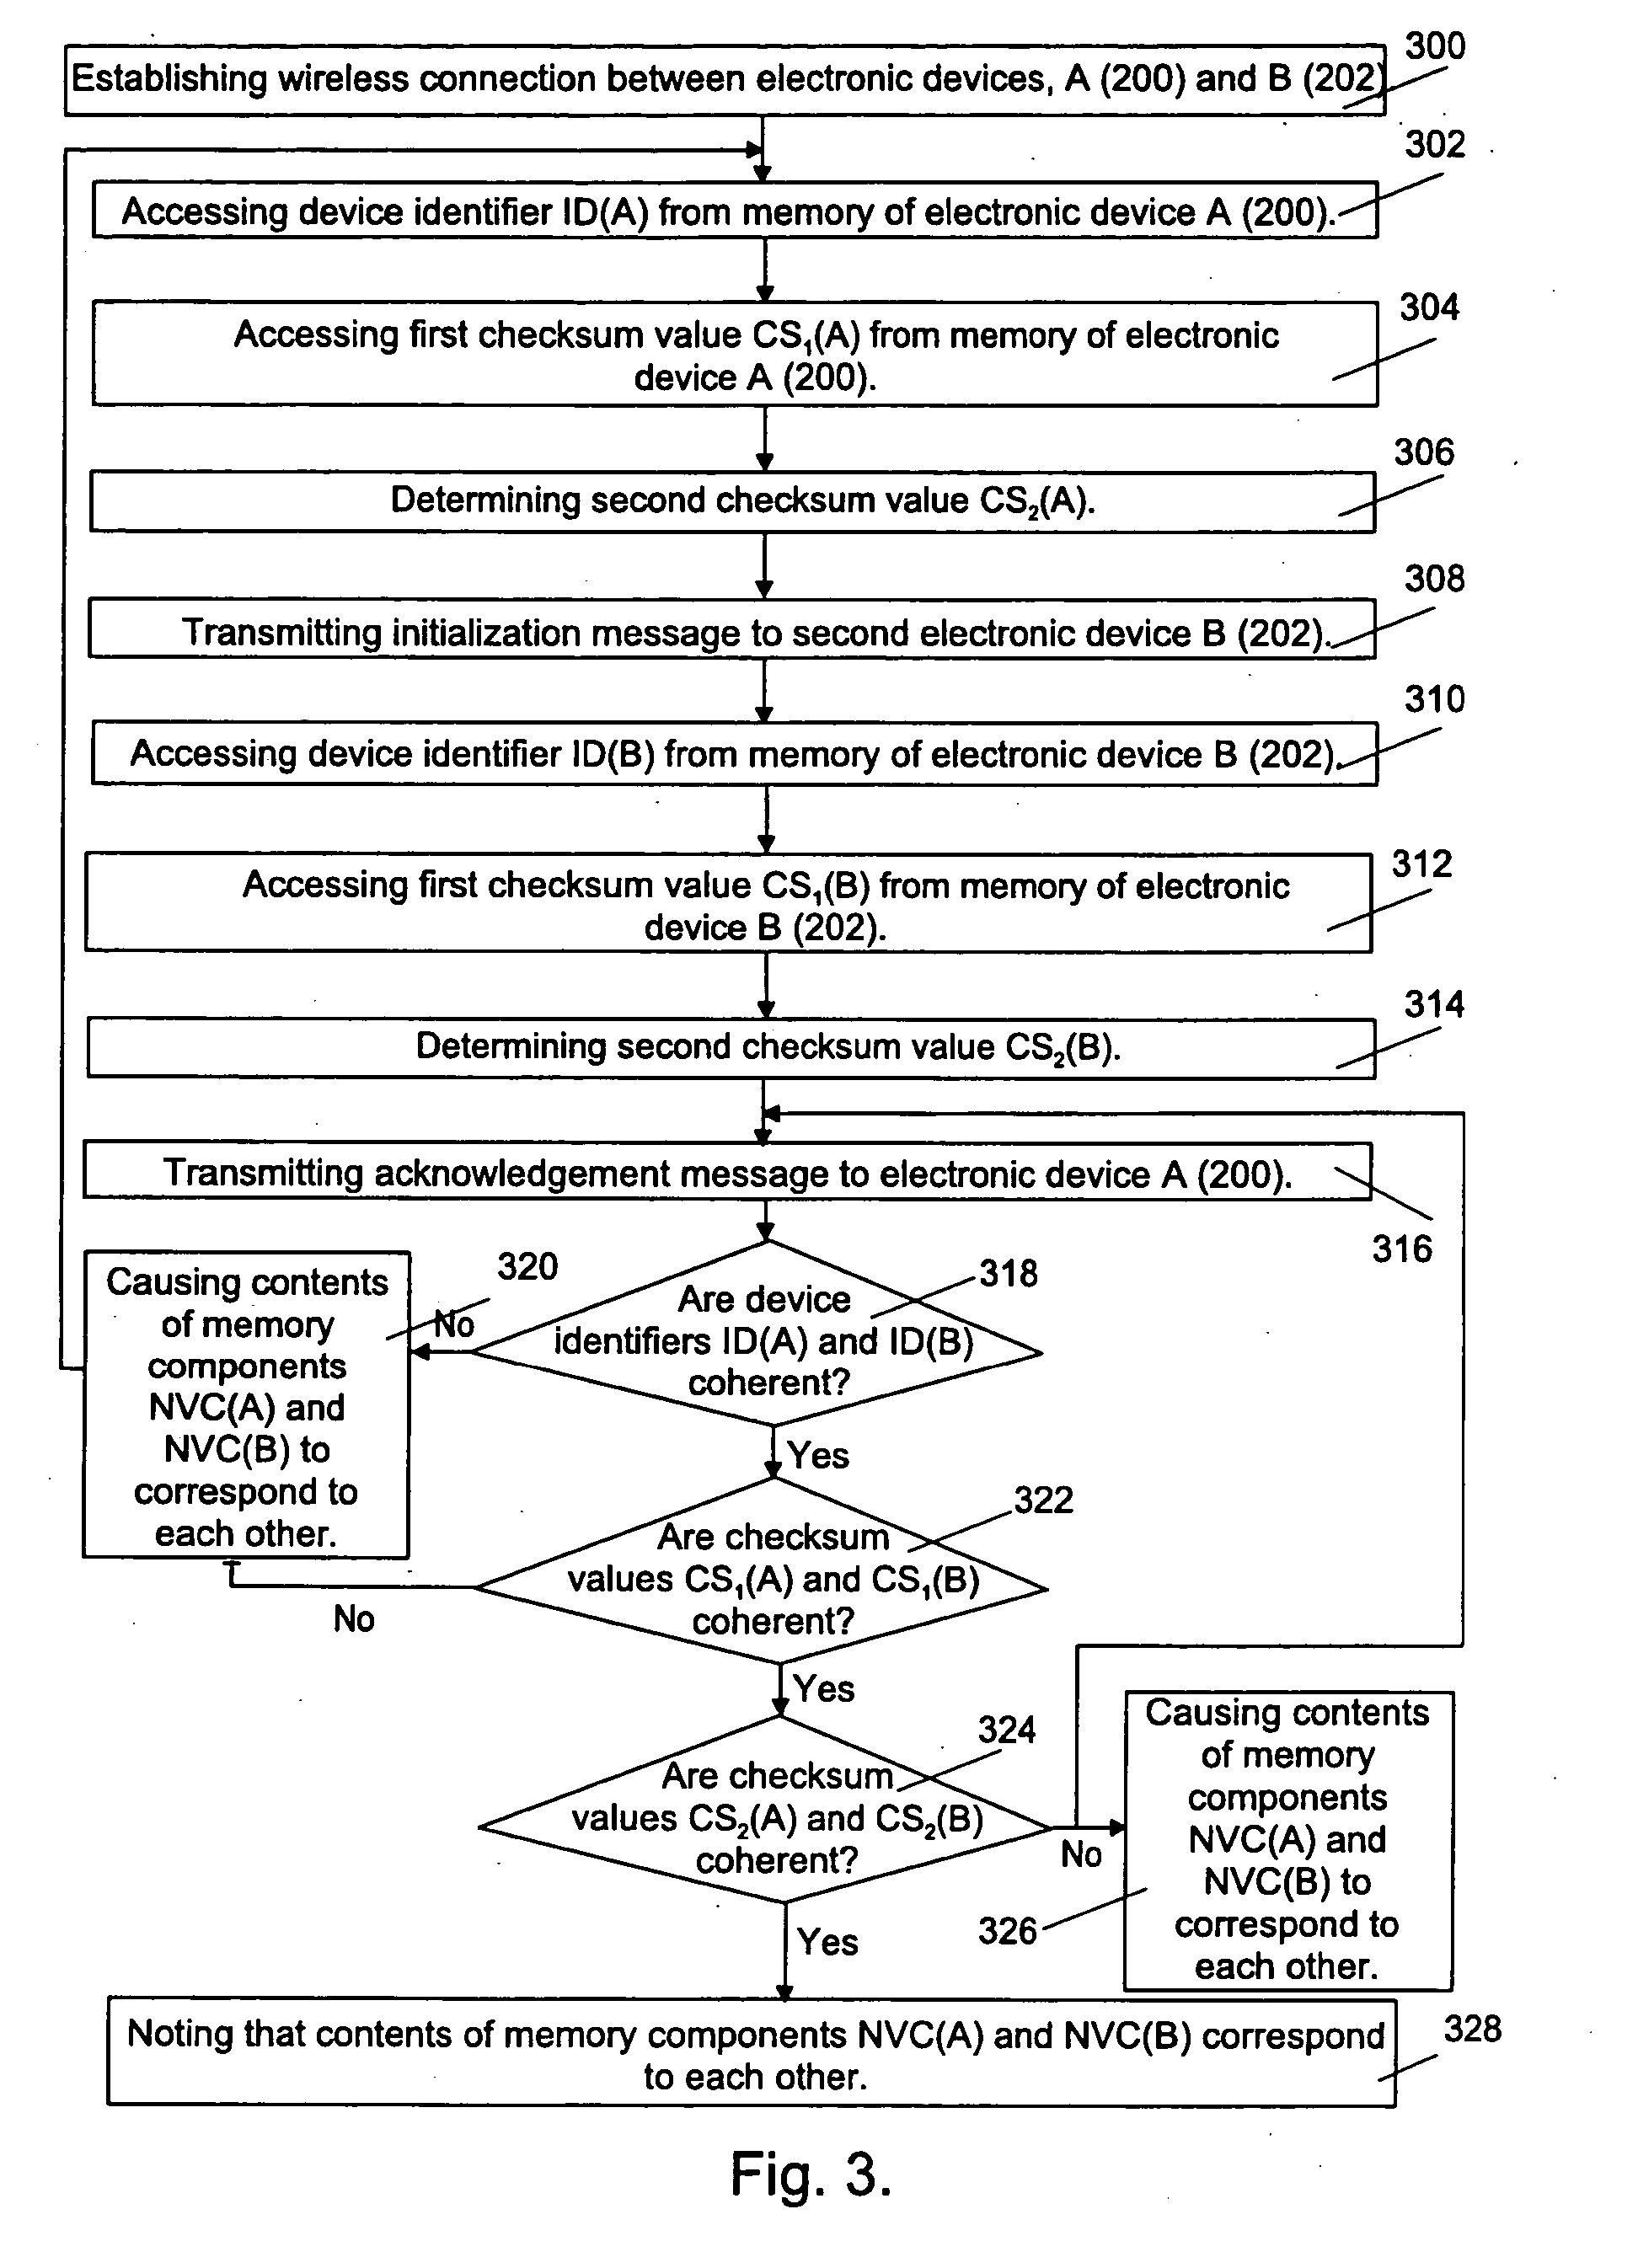 Method for comparing contents of memory components